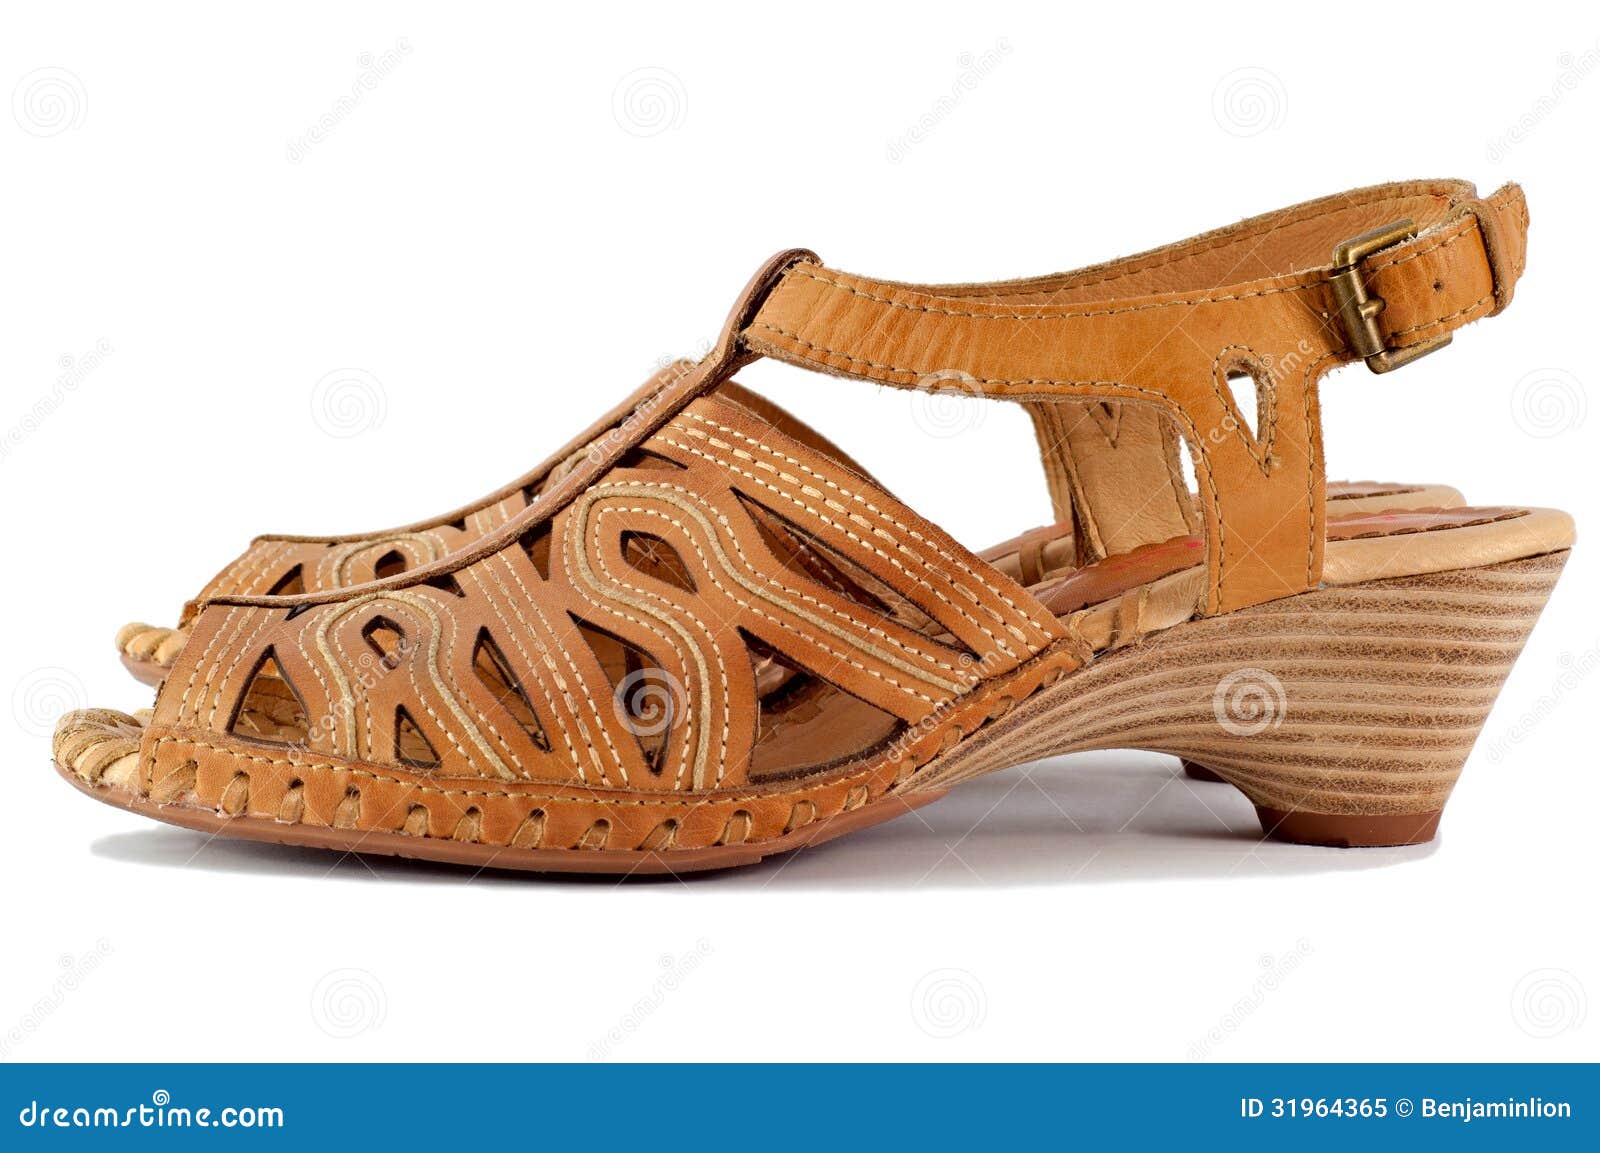 Sandals stock image. Image of pretty, cool, footwear - 31964365